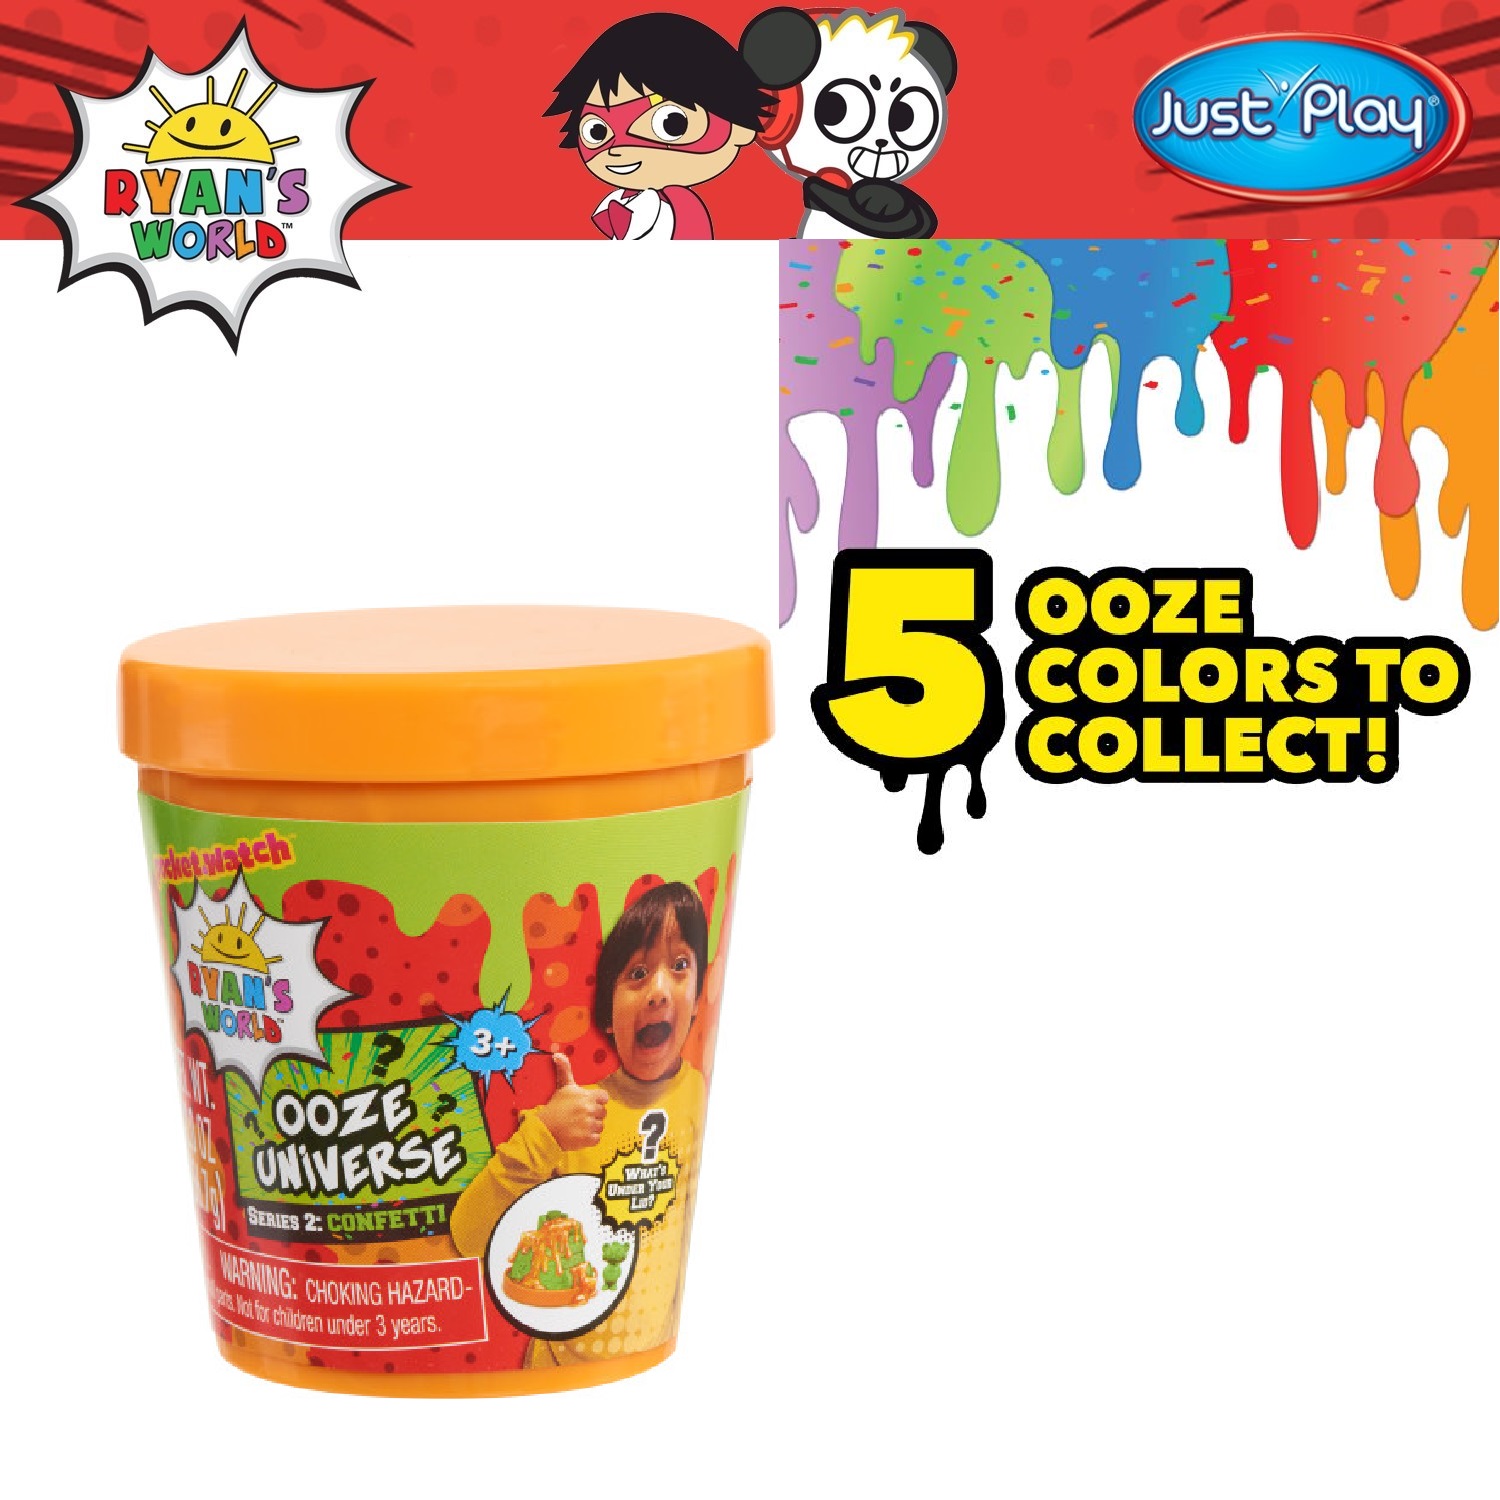 Details about   Ryan's World Lot of 2 Slime Ooze Universe Series 2 Confetti Mystery Color Pack